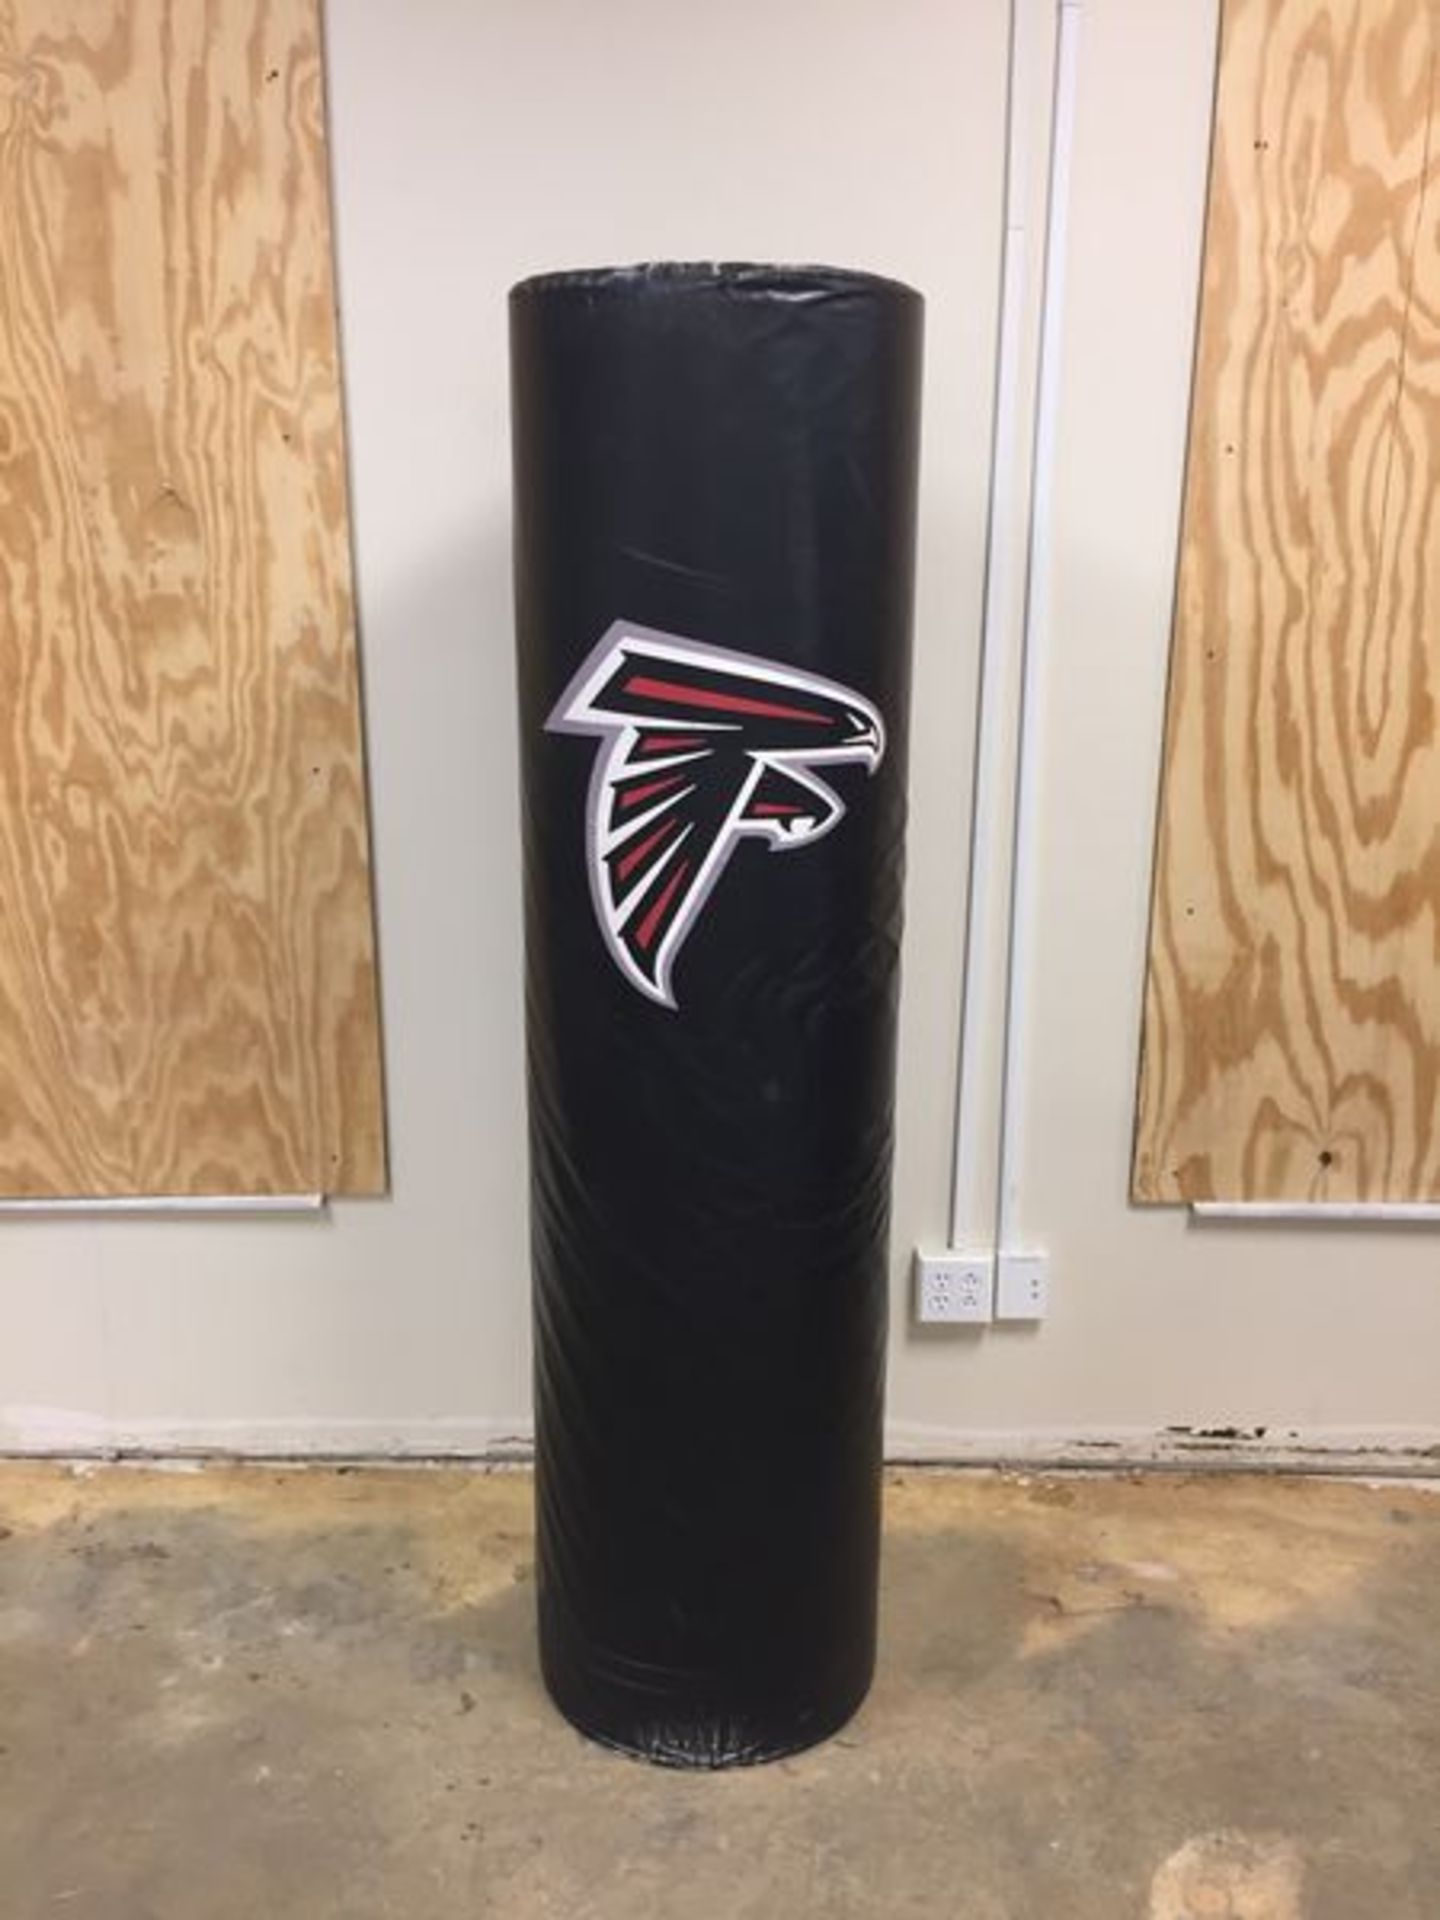 Falcons Logo"" End-Zone Wrap-Around Pole Pad / Game-Used / This item includes Georgia Dome